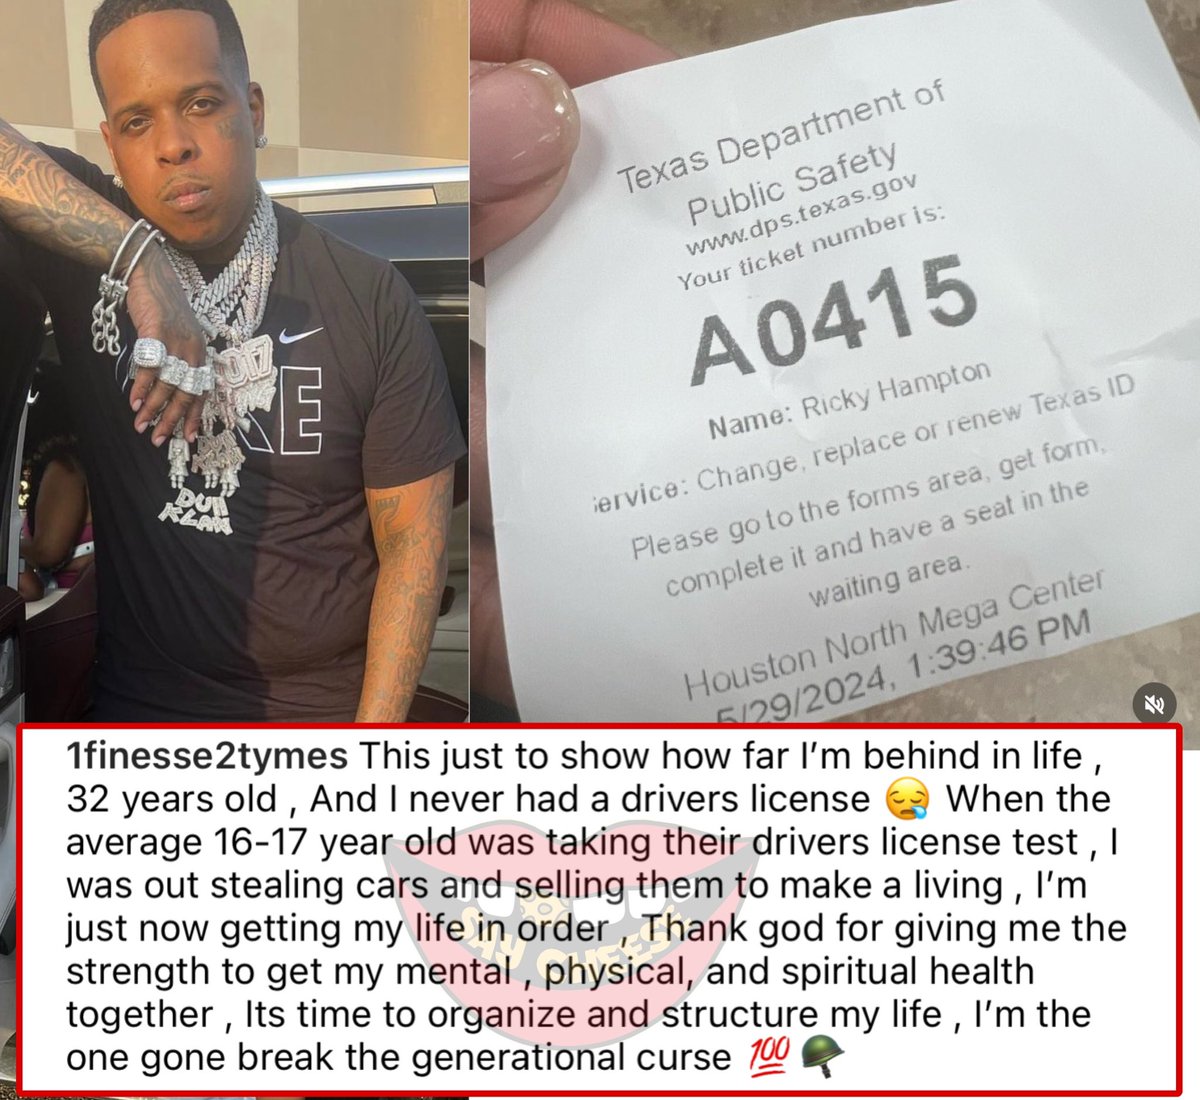 Finesse2tymes reveals that at age 32, he's getting his driver's license for the first time: “When the average 16-17 year old was taking their driver license test I was out stealing cars & selling them to make a living”